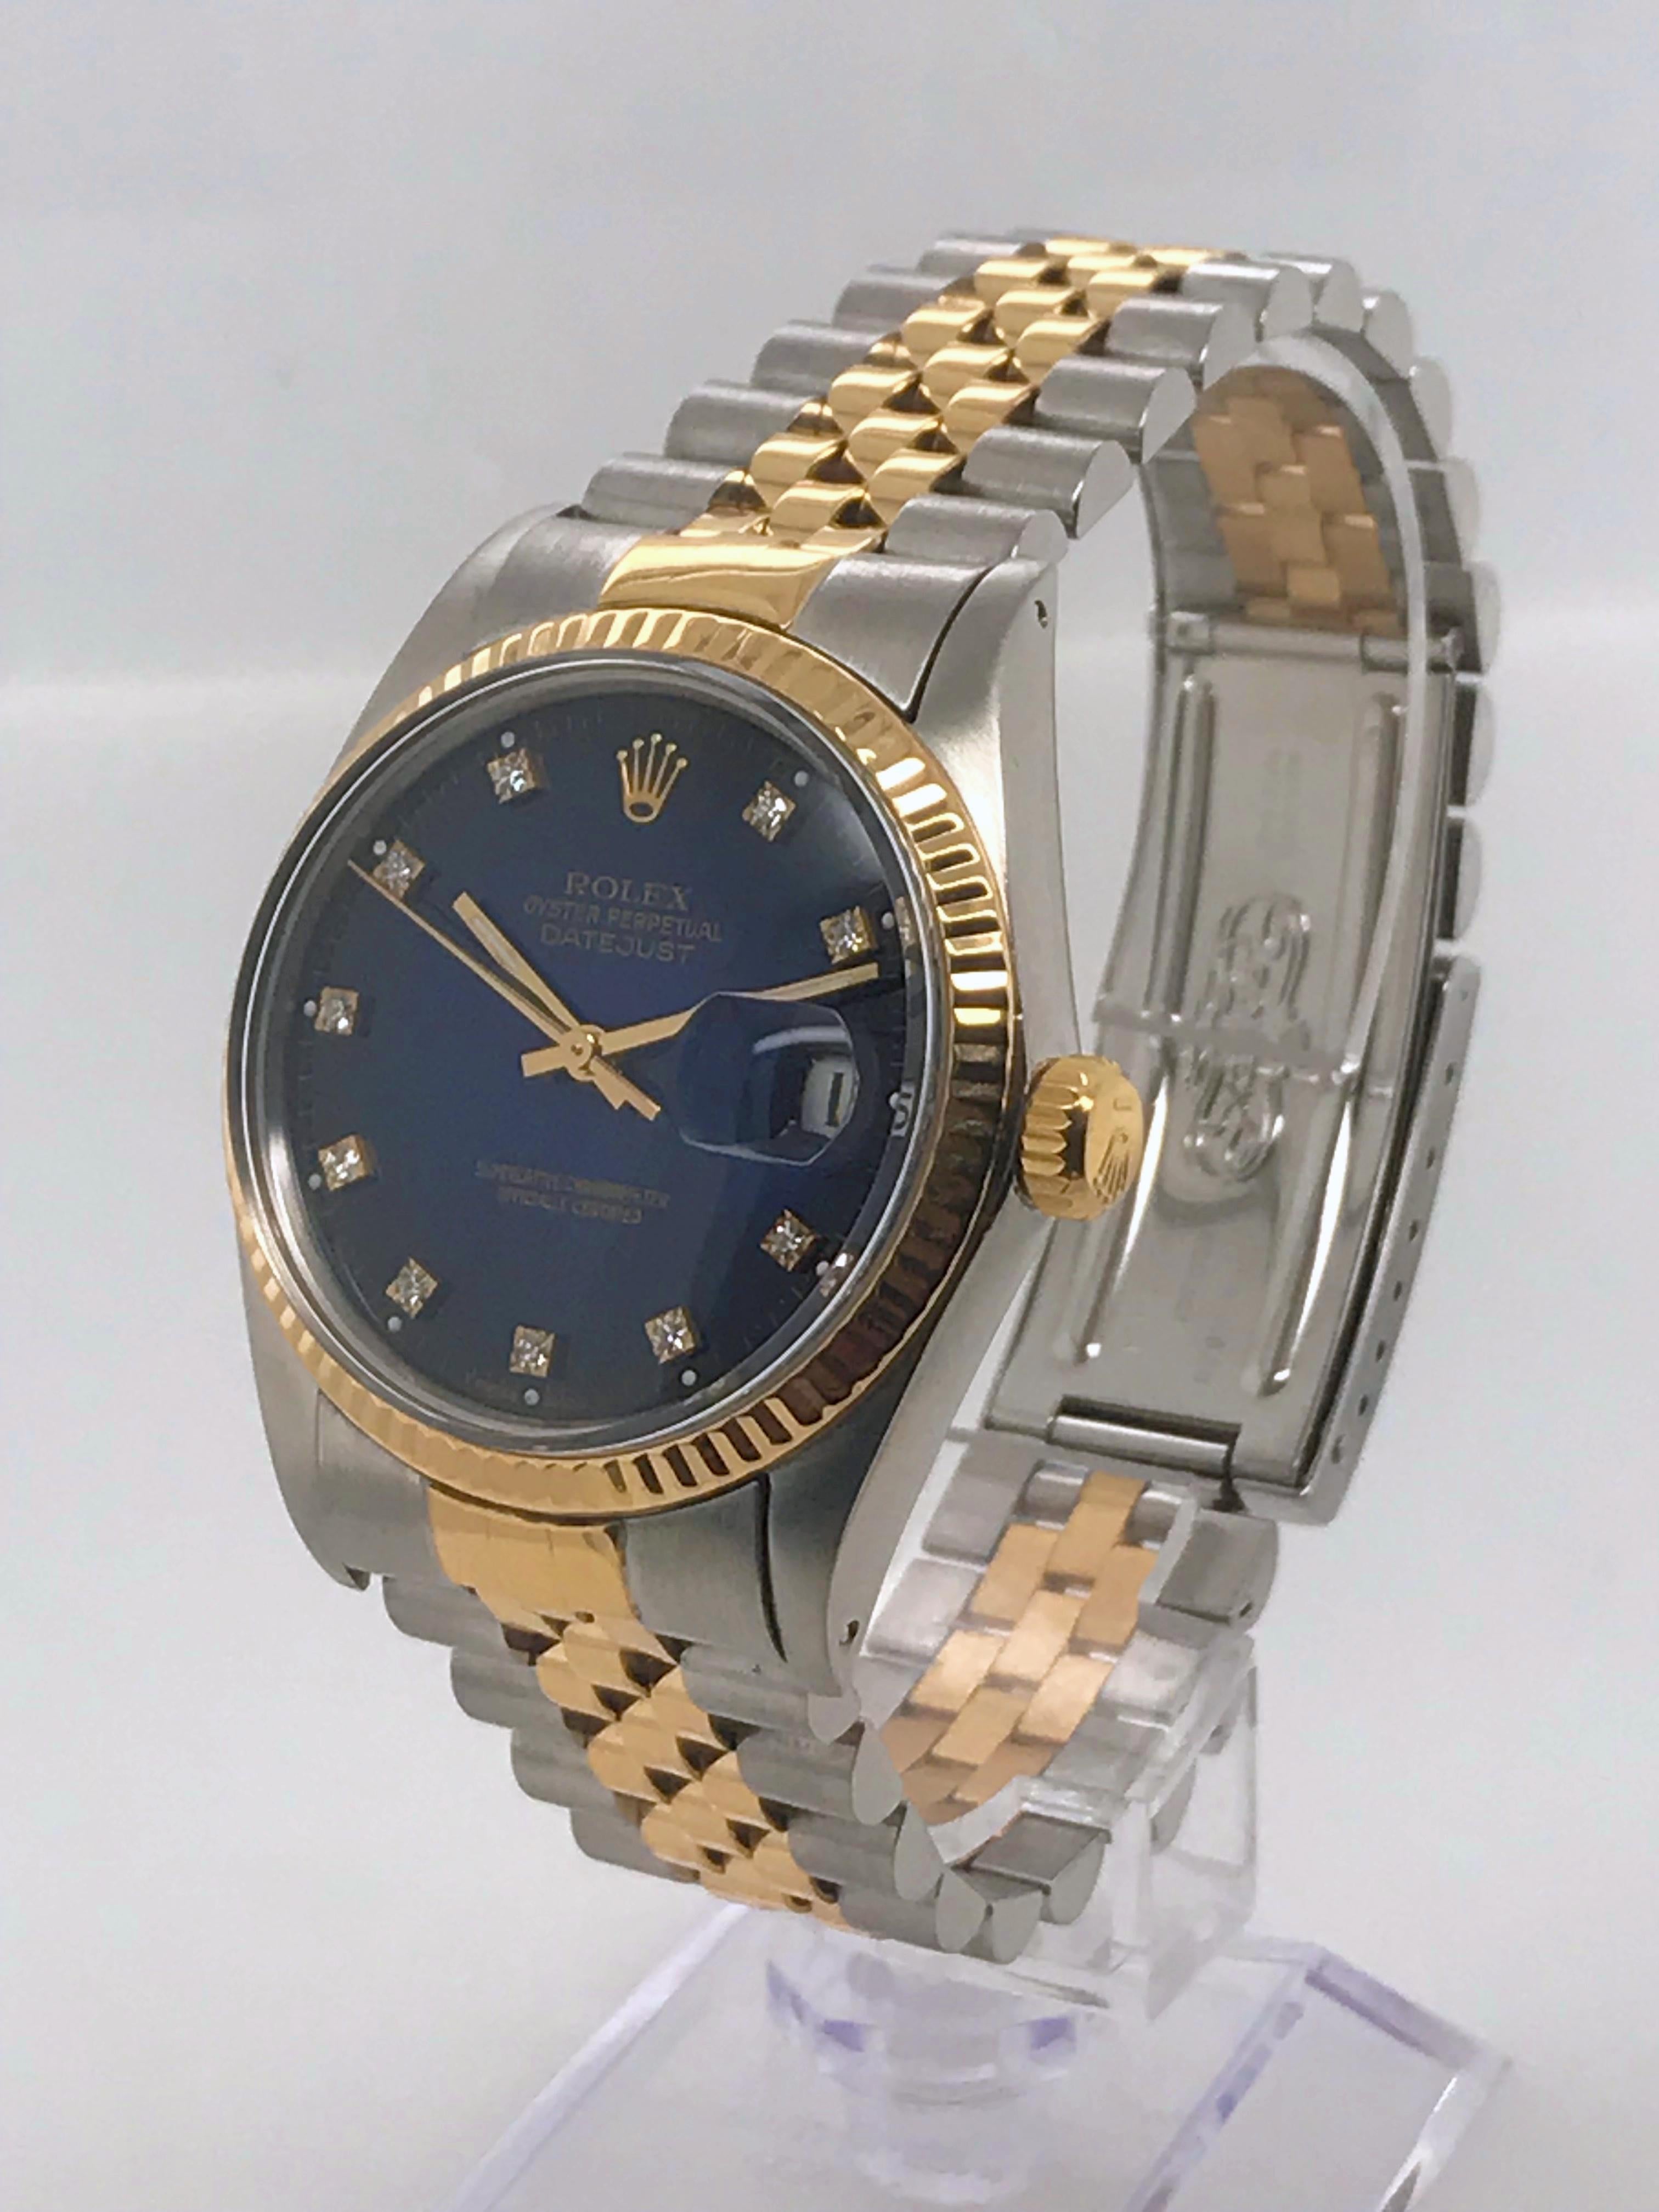 This two-tone Rolex Datejust is a classic 36mm size on a two-tone Jubilee bracelet. It features a rich blue dial and diamond markers as well as a date window at the 6 o’clock position. 
	
This timepiece was recently serviced and authenticated by a